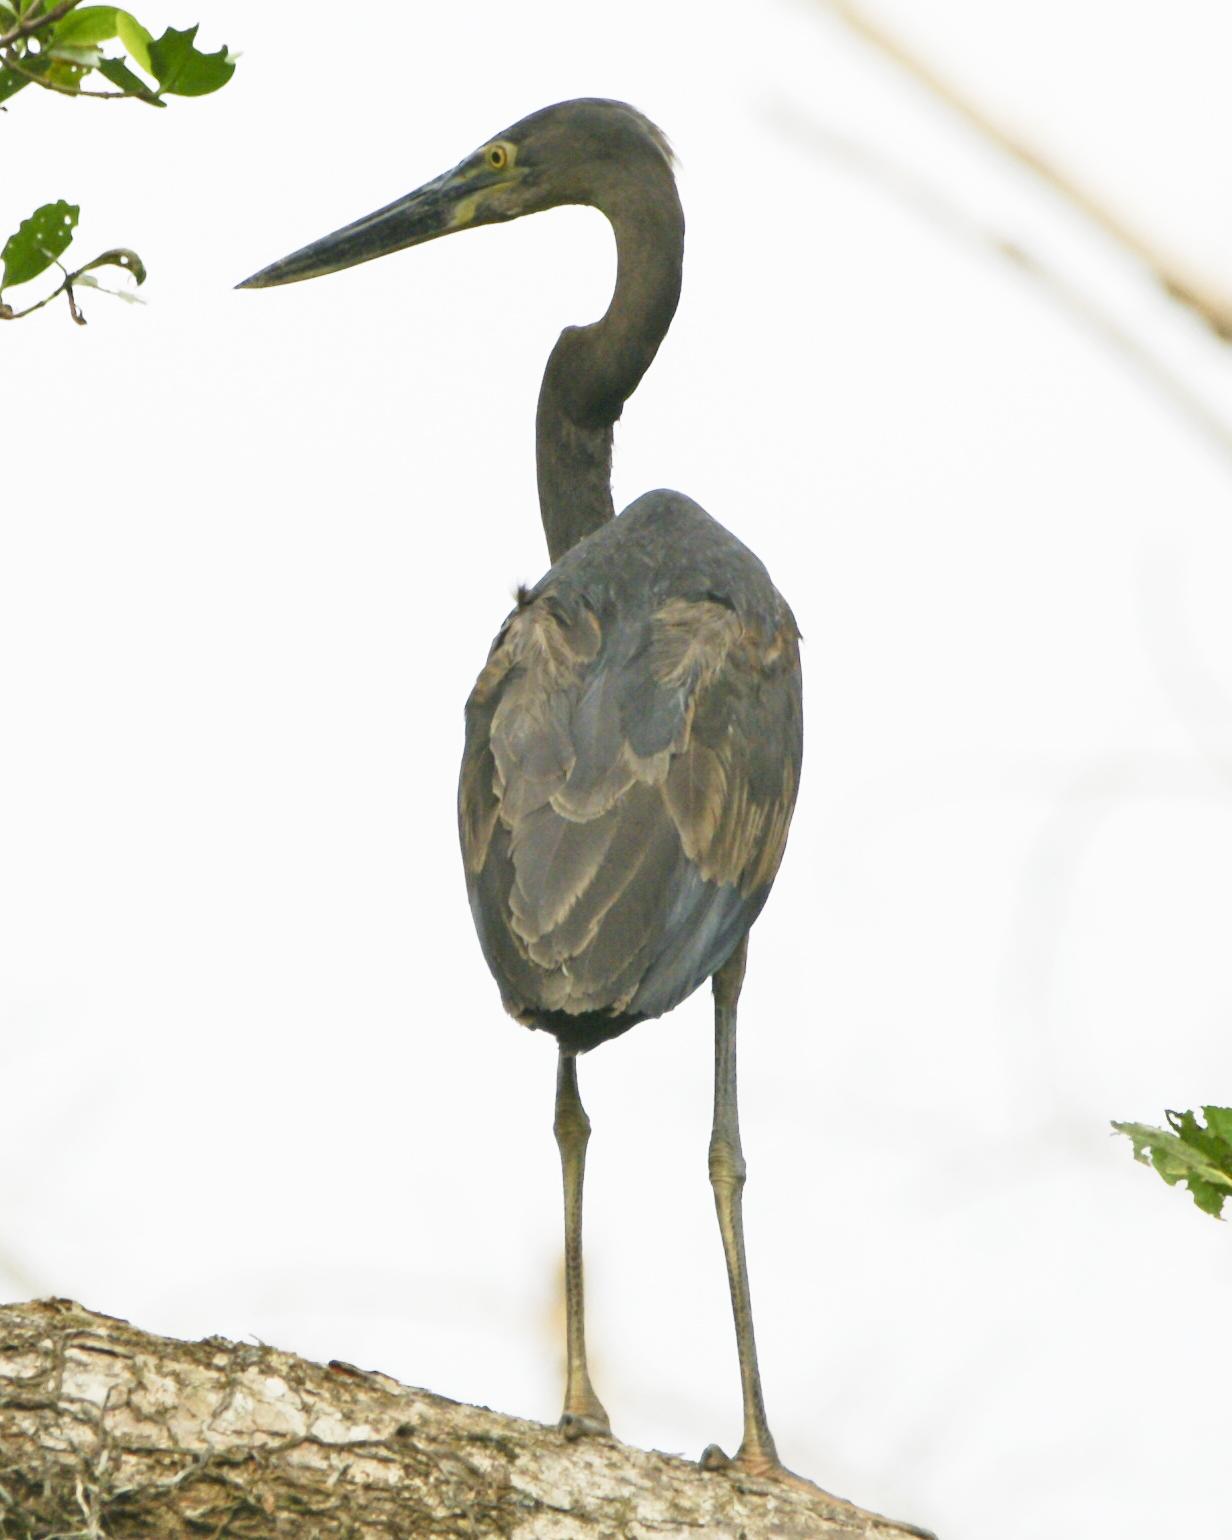 Great-billed Heron Photo by Penny Hall